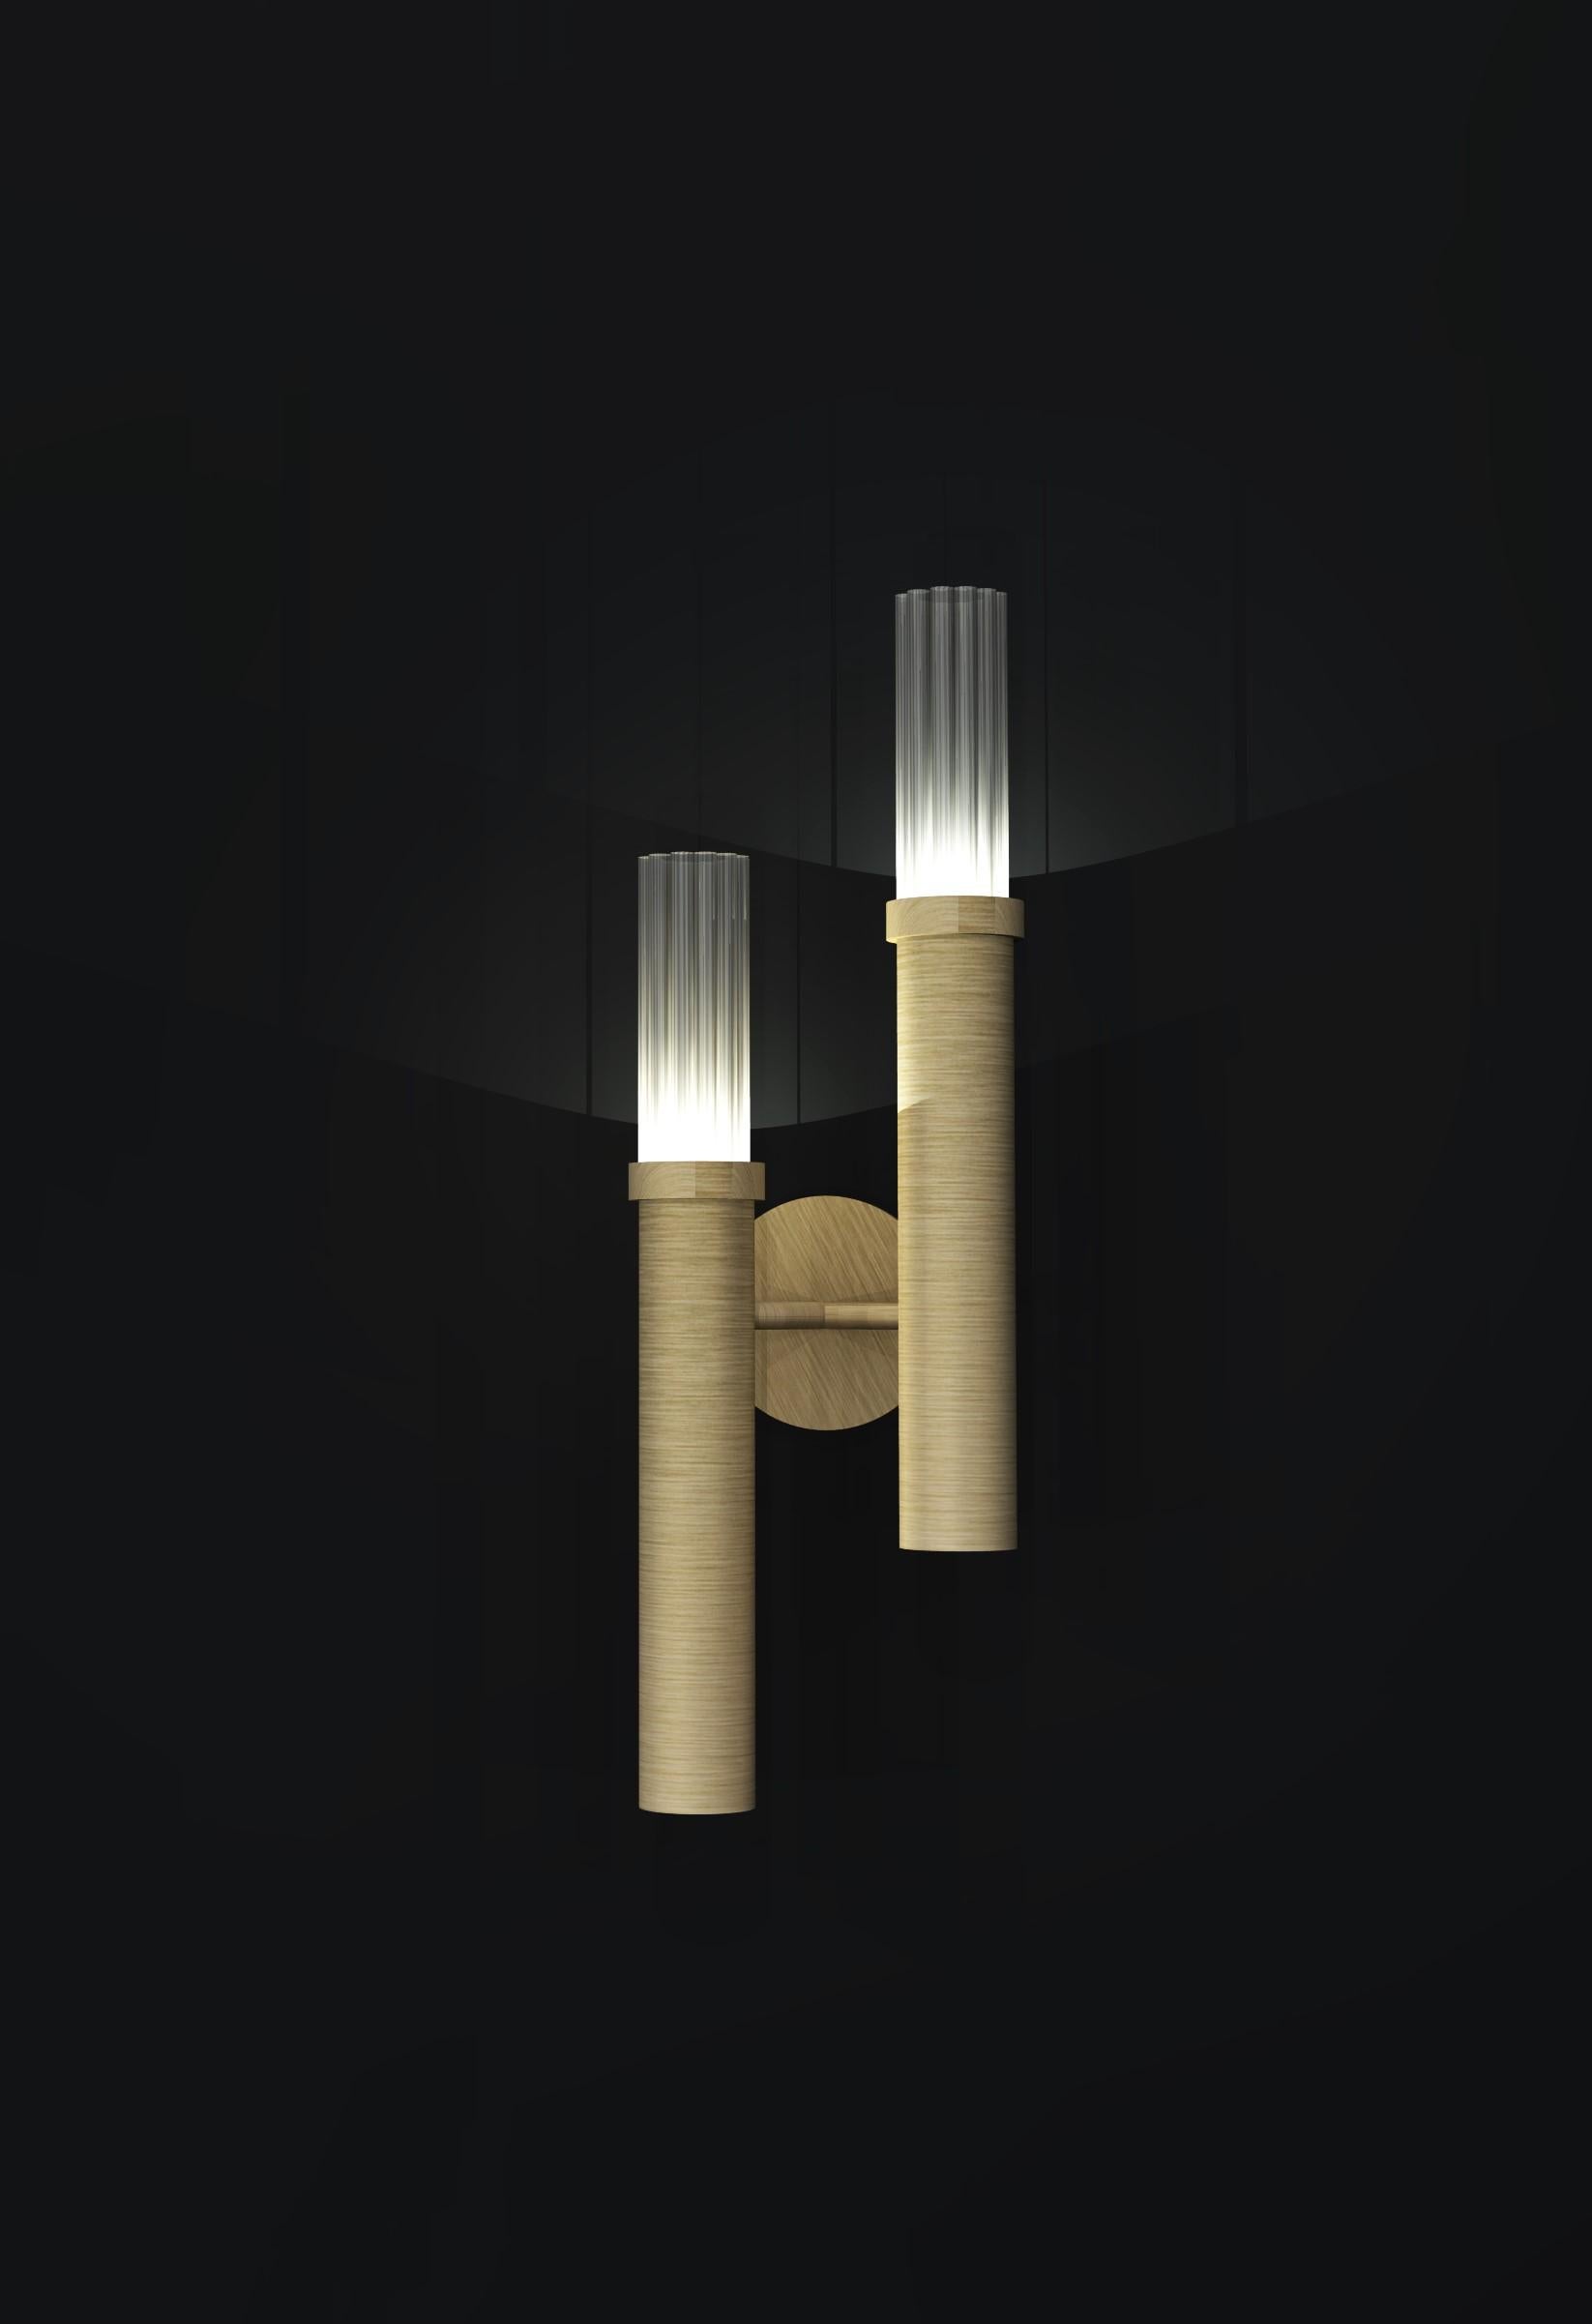 Contemporary Wall Light in fluted glass and brushed brass finish.

Width: 180mm
Height: 400mm
2 x G9 lampholders (w/o bulbs)

Made to order to buyer's specification. Variations to dimensions and finishes can be made.